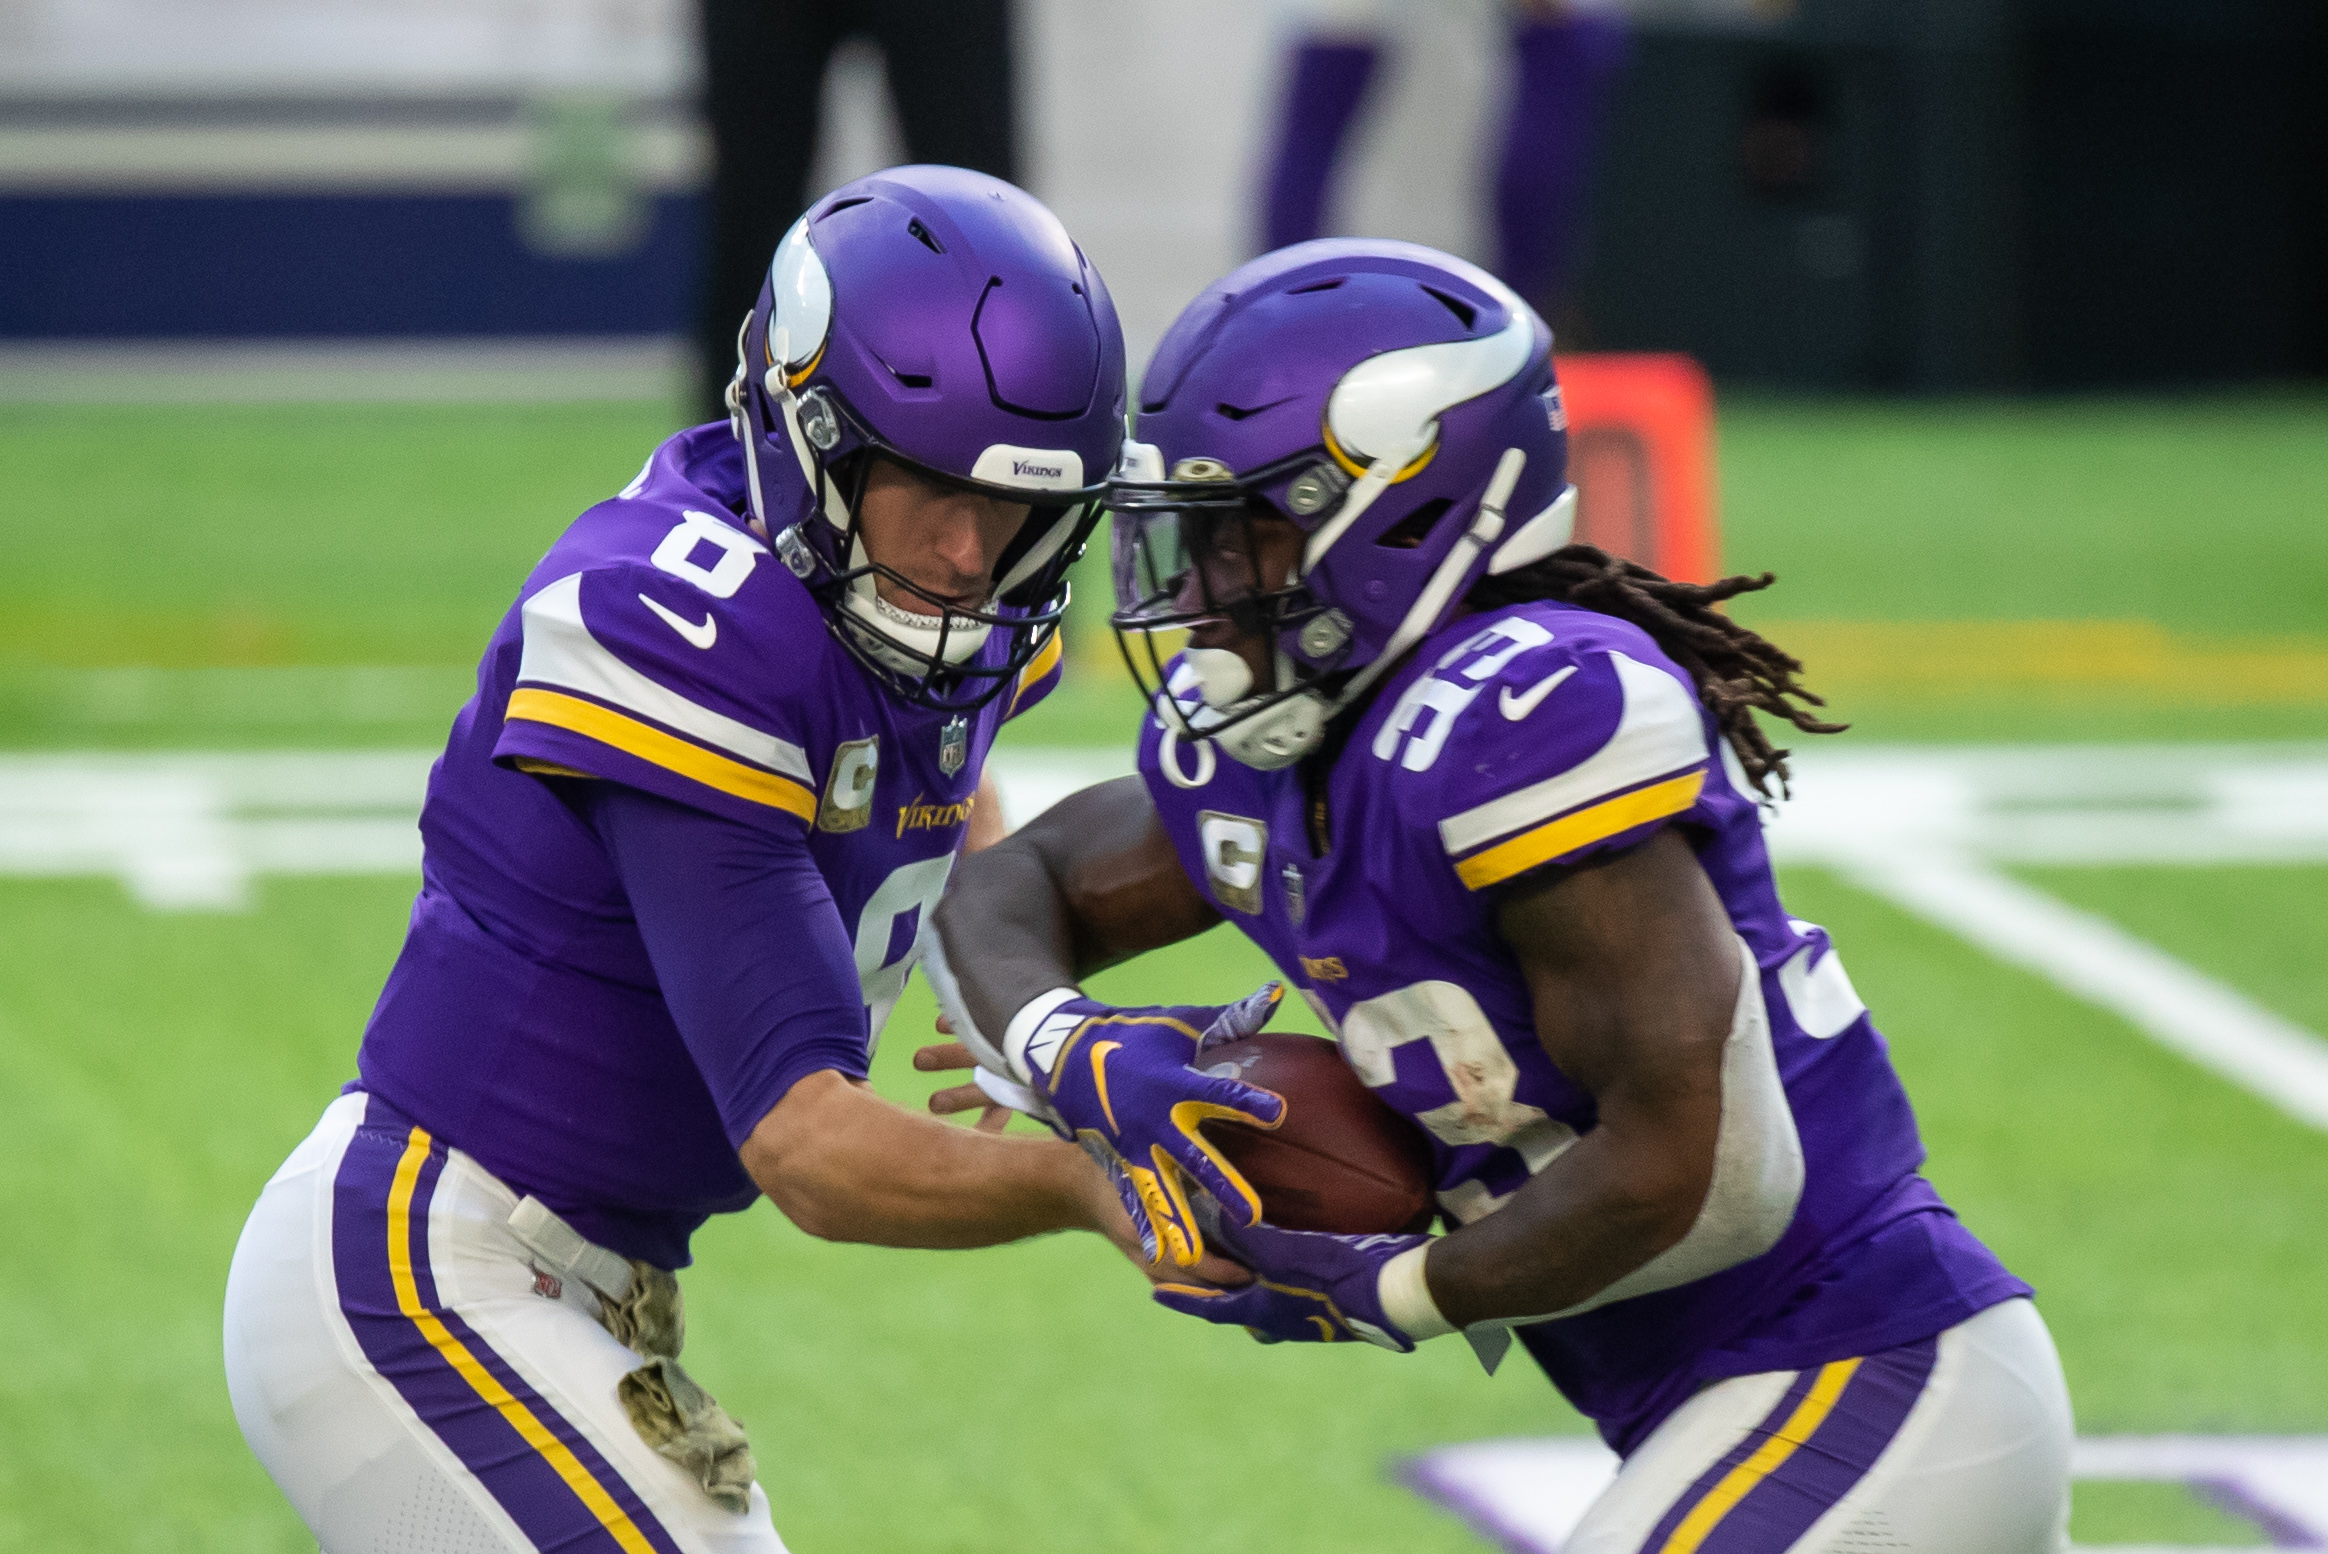 Minnesota Vikings quarterback Kirk Cousins (8) hands the ball off to running back Dalvin Cook (33) against the Detroit Lions in the third quarter at U.S. Bank Stadium.